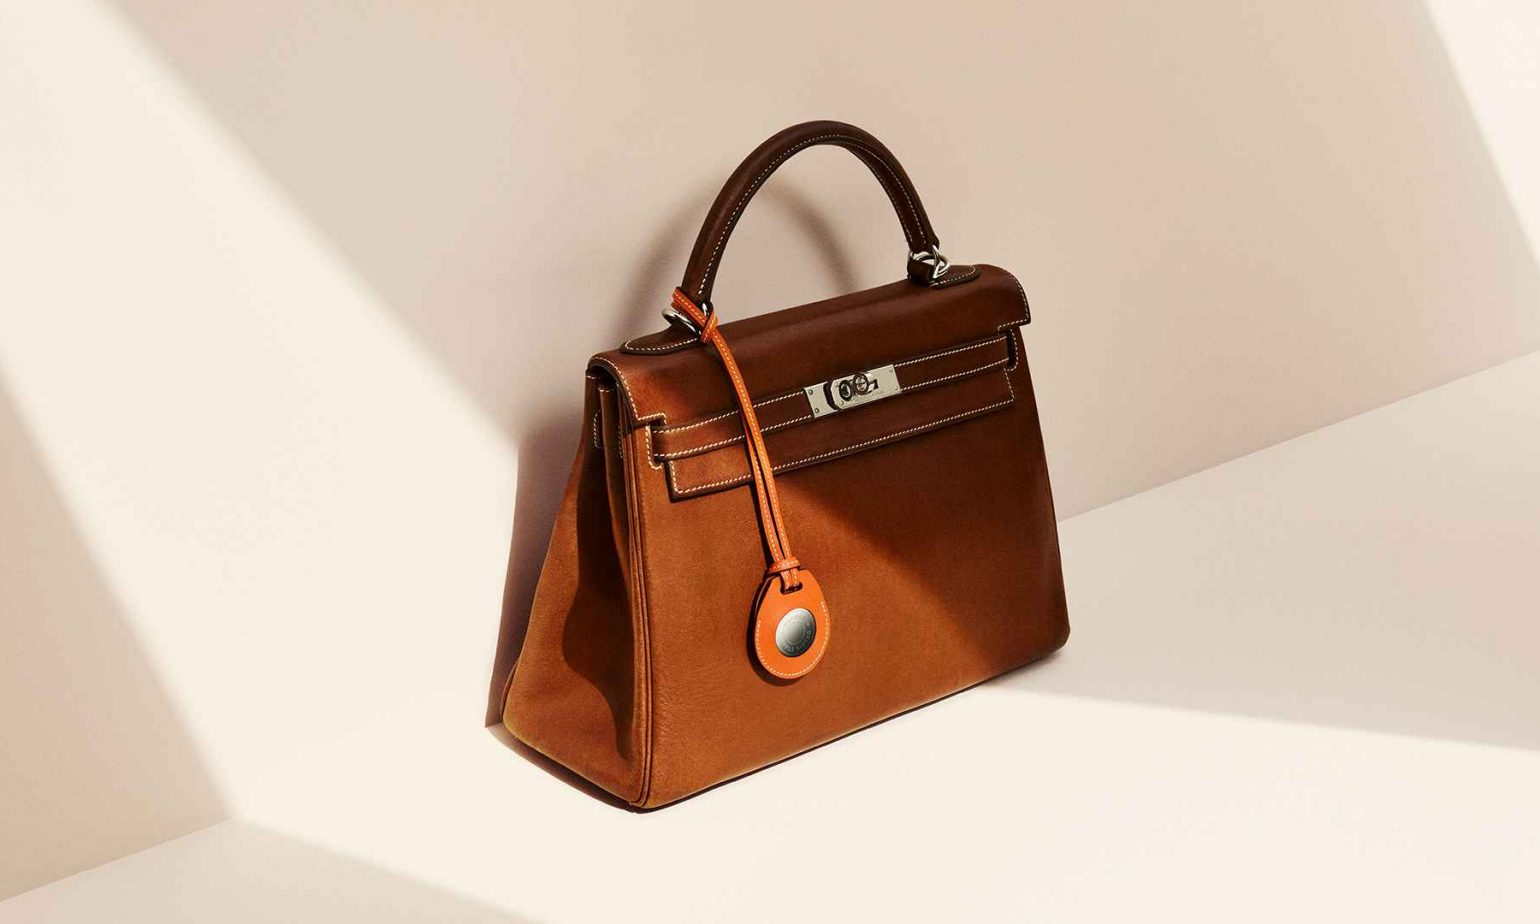 These new accessories by Apple x Hermès are the definition of extra